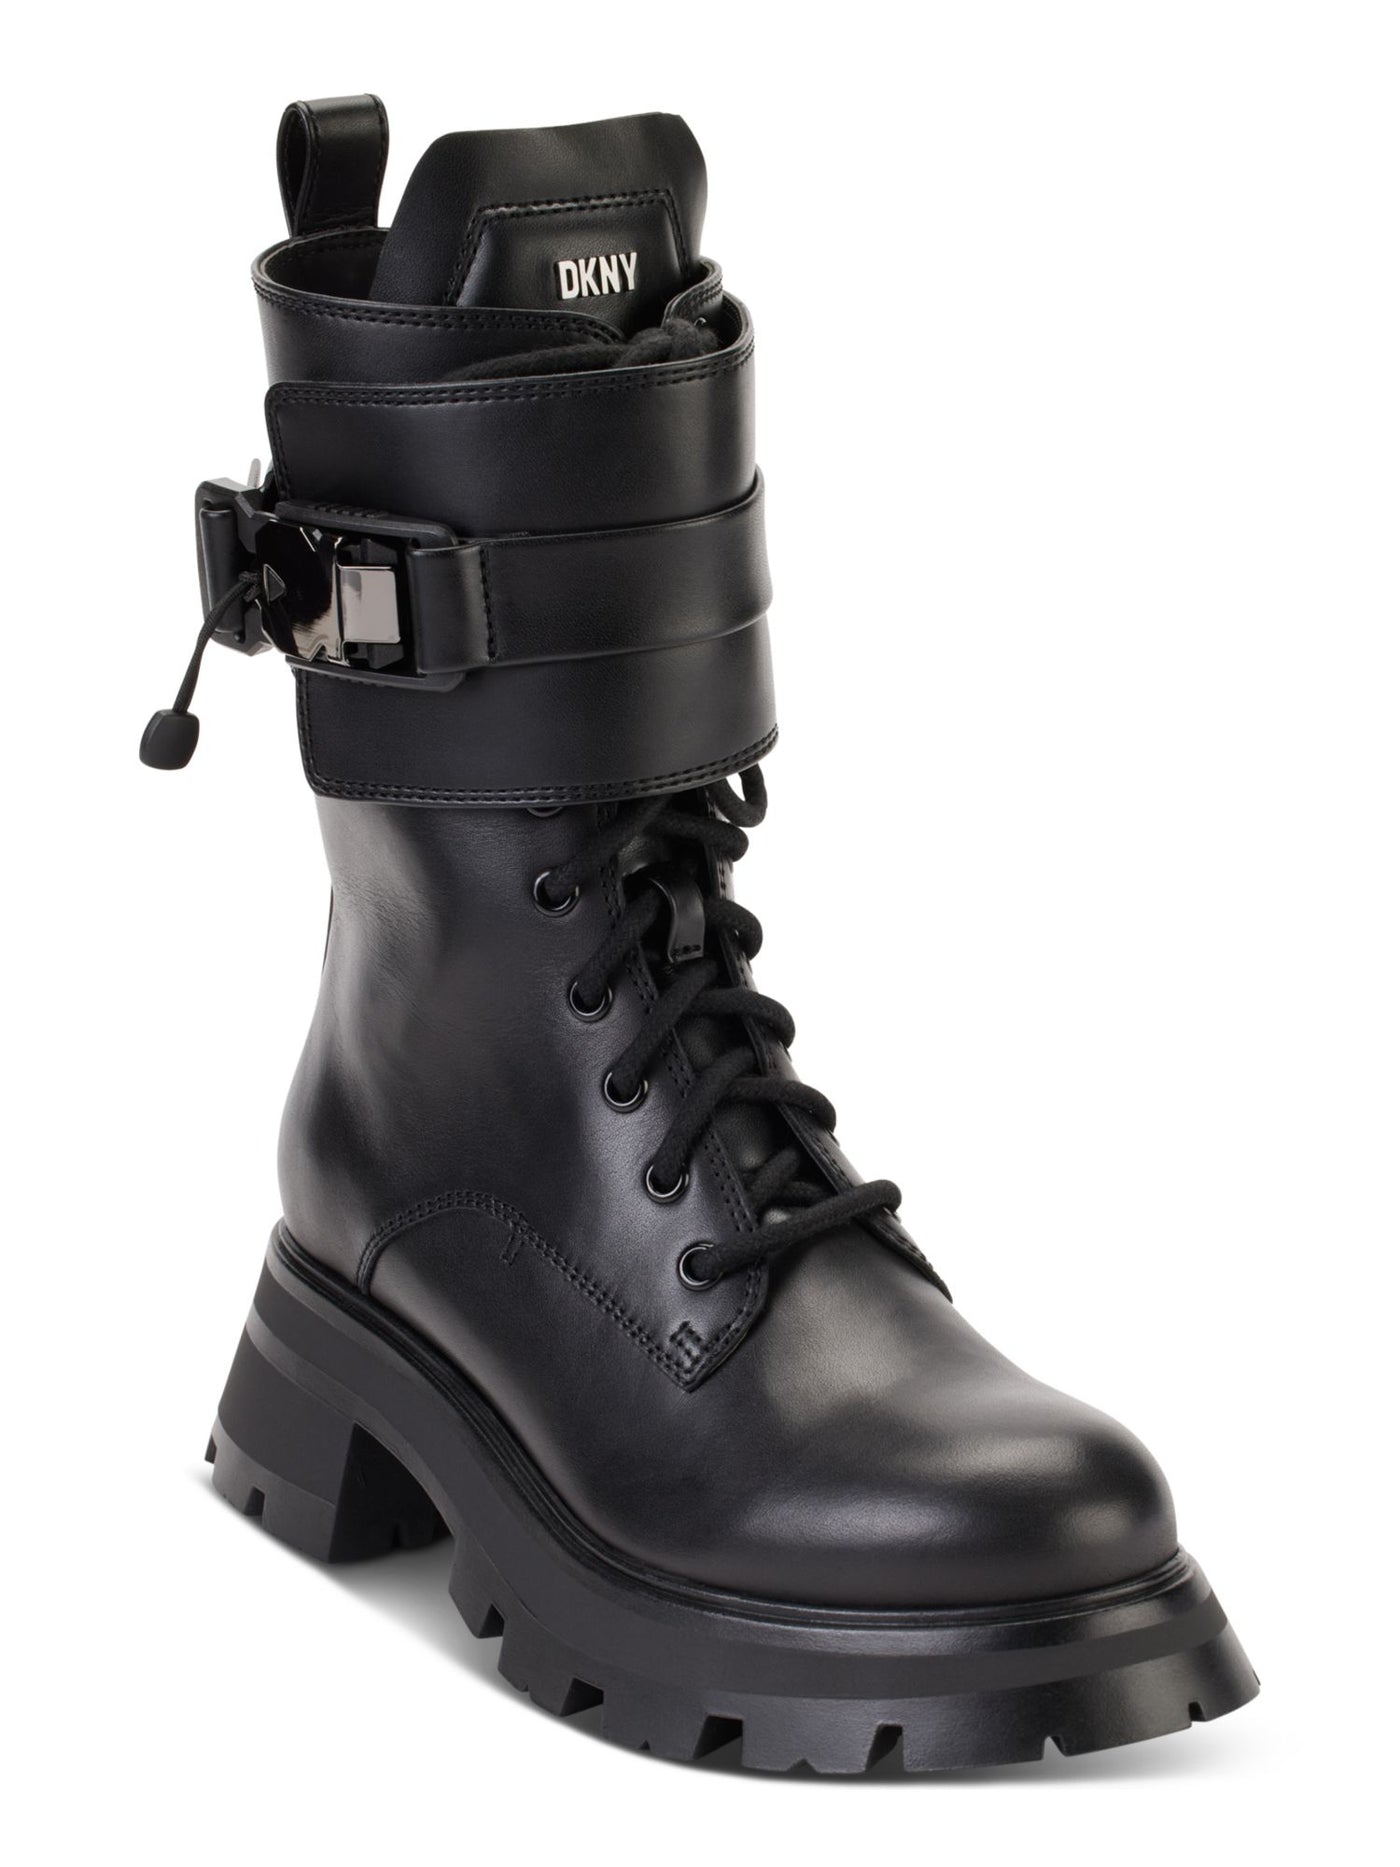 DKNY Womens Black Padded Pull Tab Buckle Accent Lug Sole Sava Round Toe Block Heel Zip-Up Leather Combat Boots 11 M